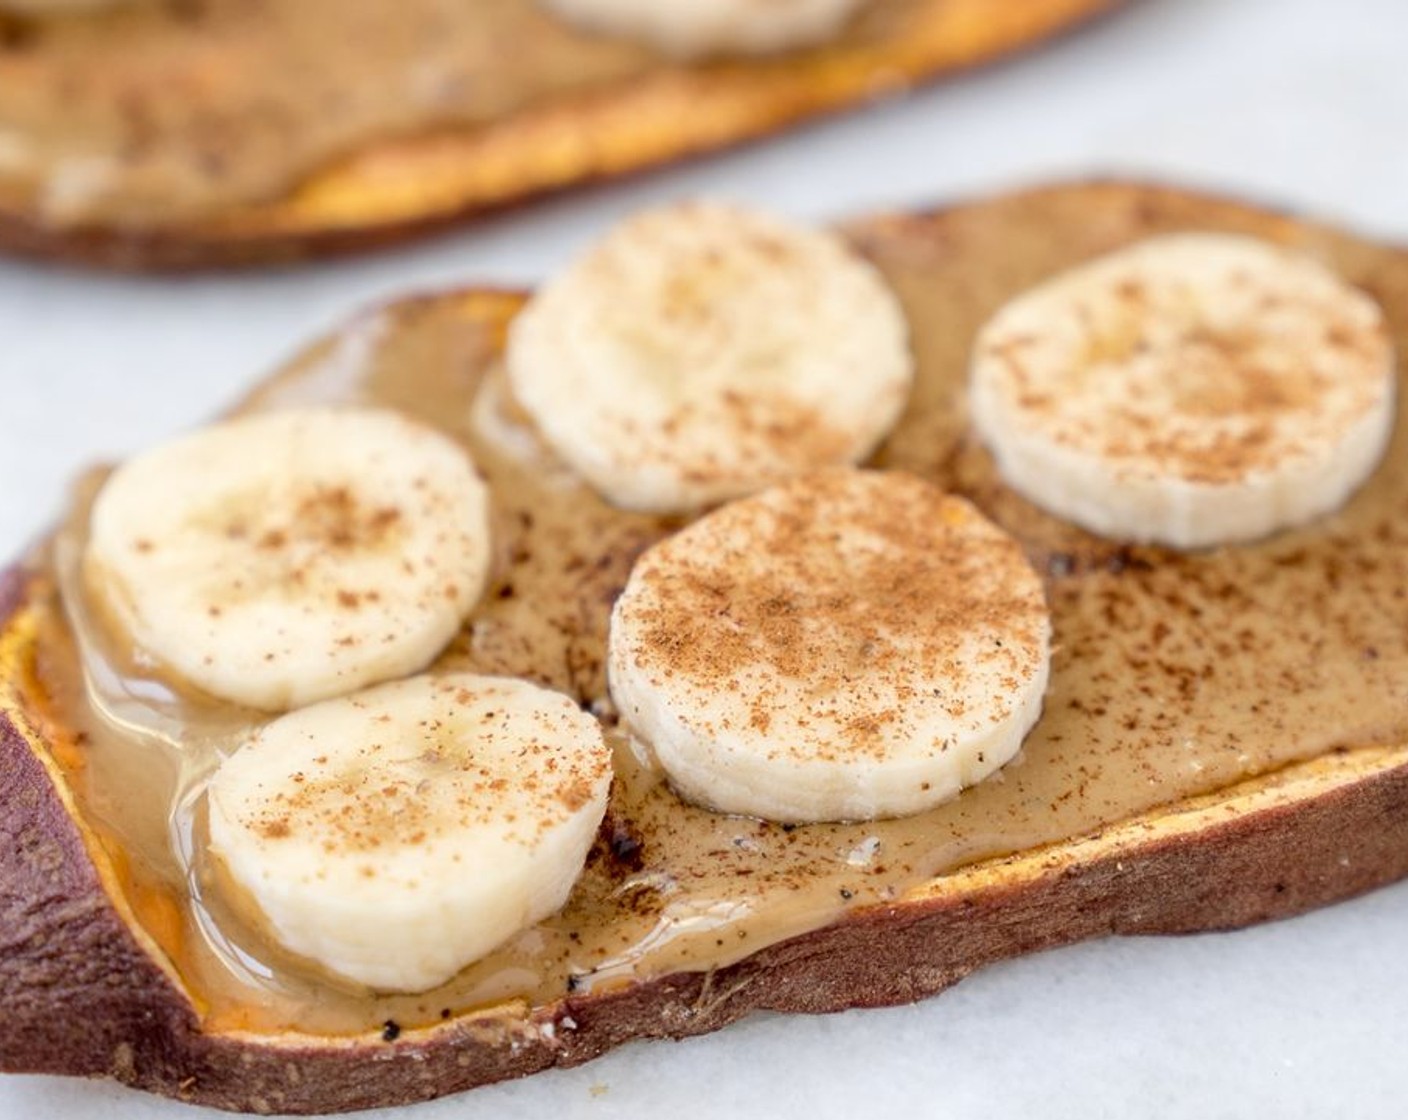 step 5 Slather 2 toasties with Sunflower Seed Butter (1/4 cup). Top with Banana (1/2) and sprinkle with Ground Cinnamon (1/2 tsp)